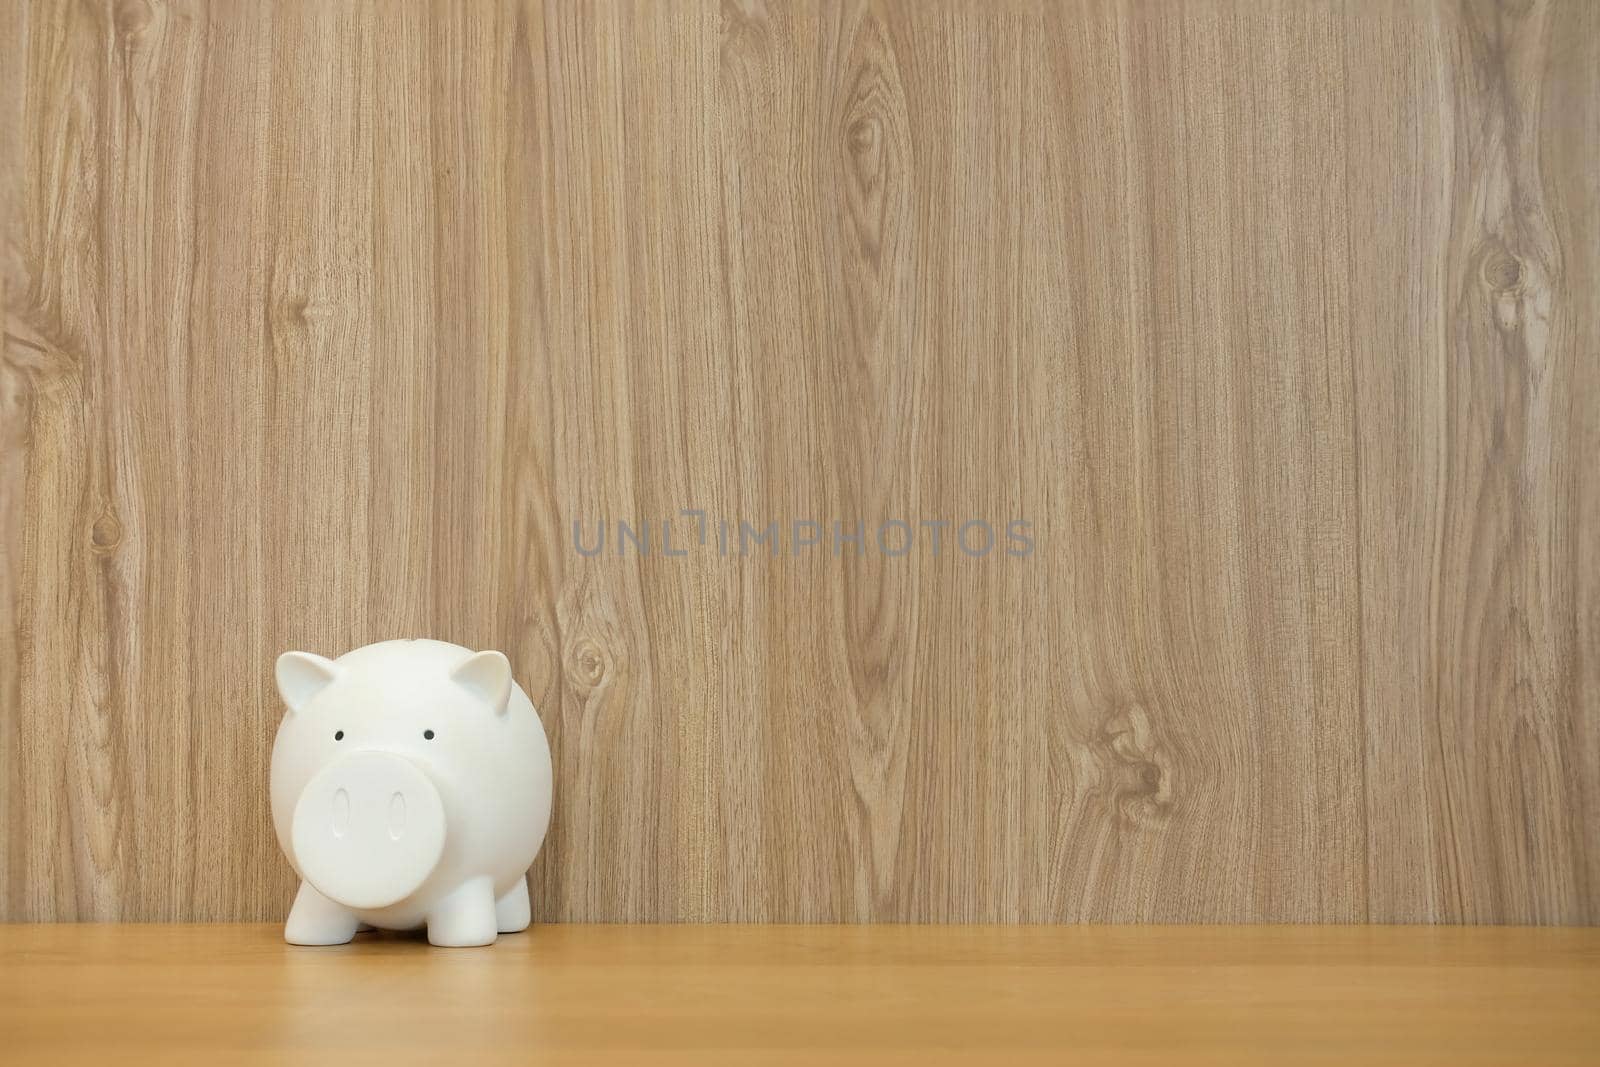 piggy bank. money saving finance investment concept by pp99